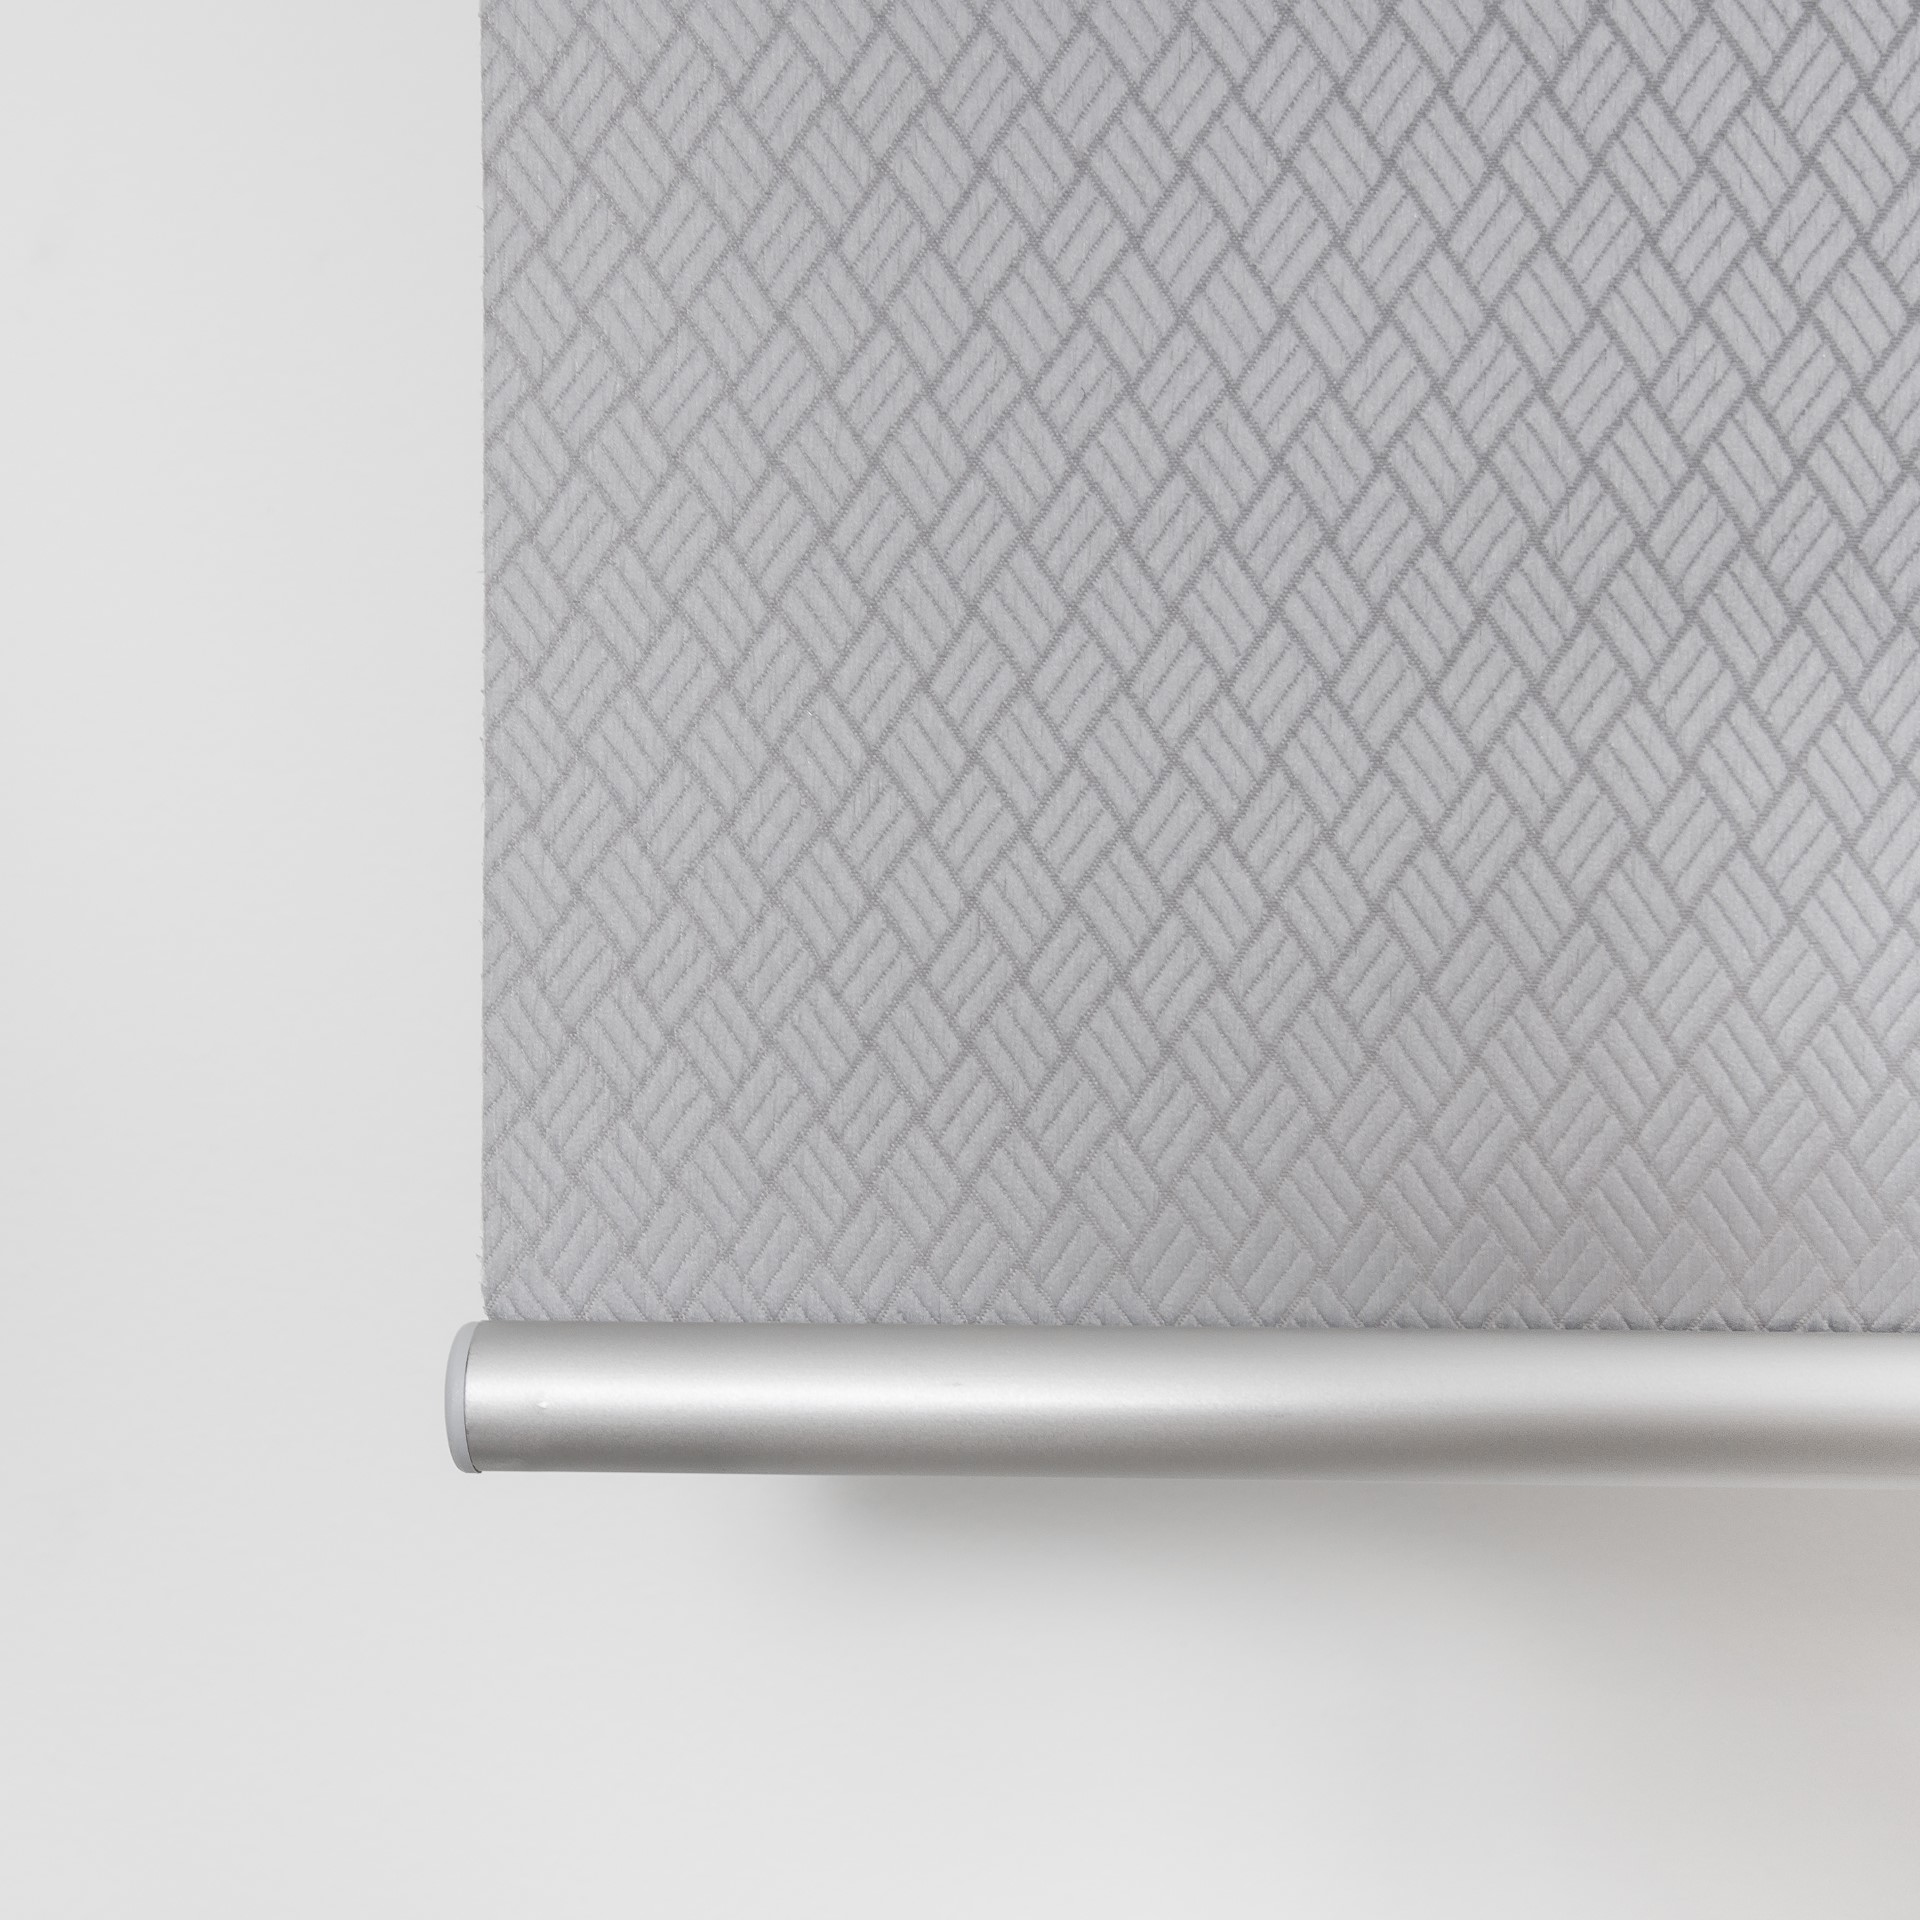 Ribbed Translucent Roller Blind Grey Counterweight Detail